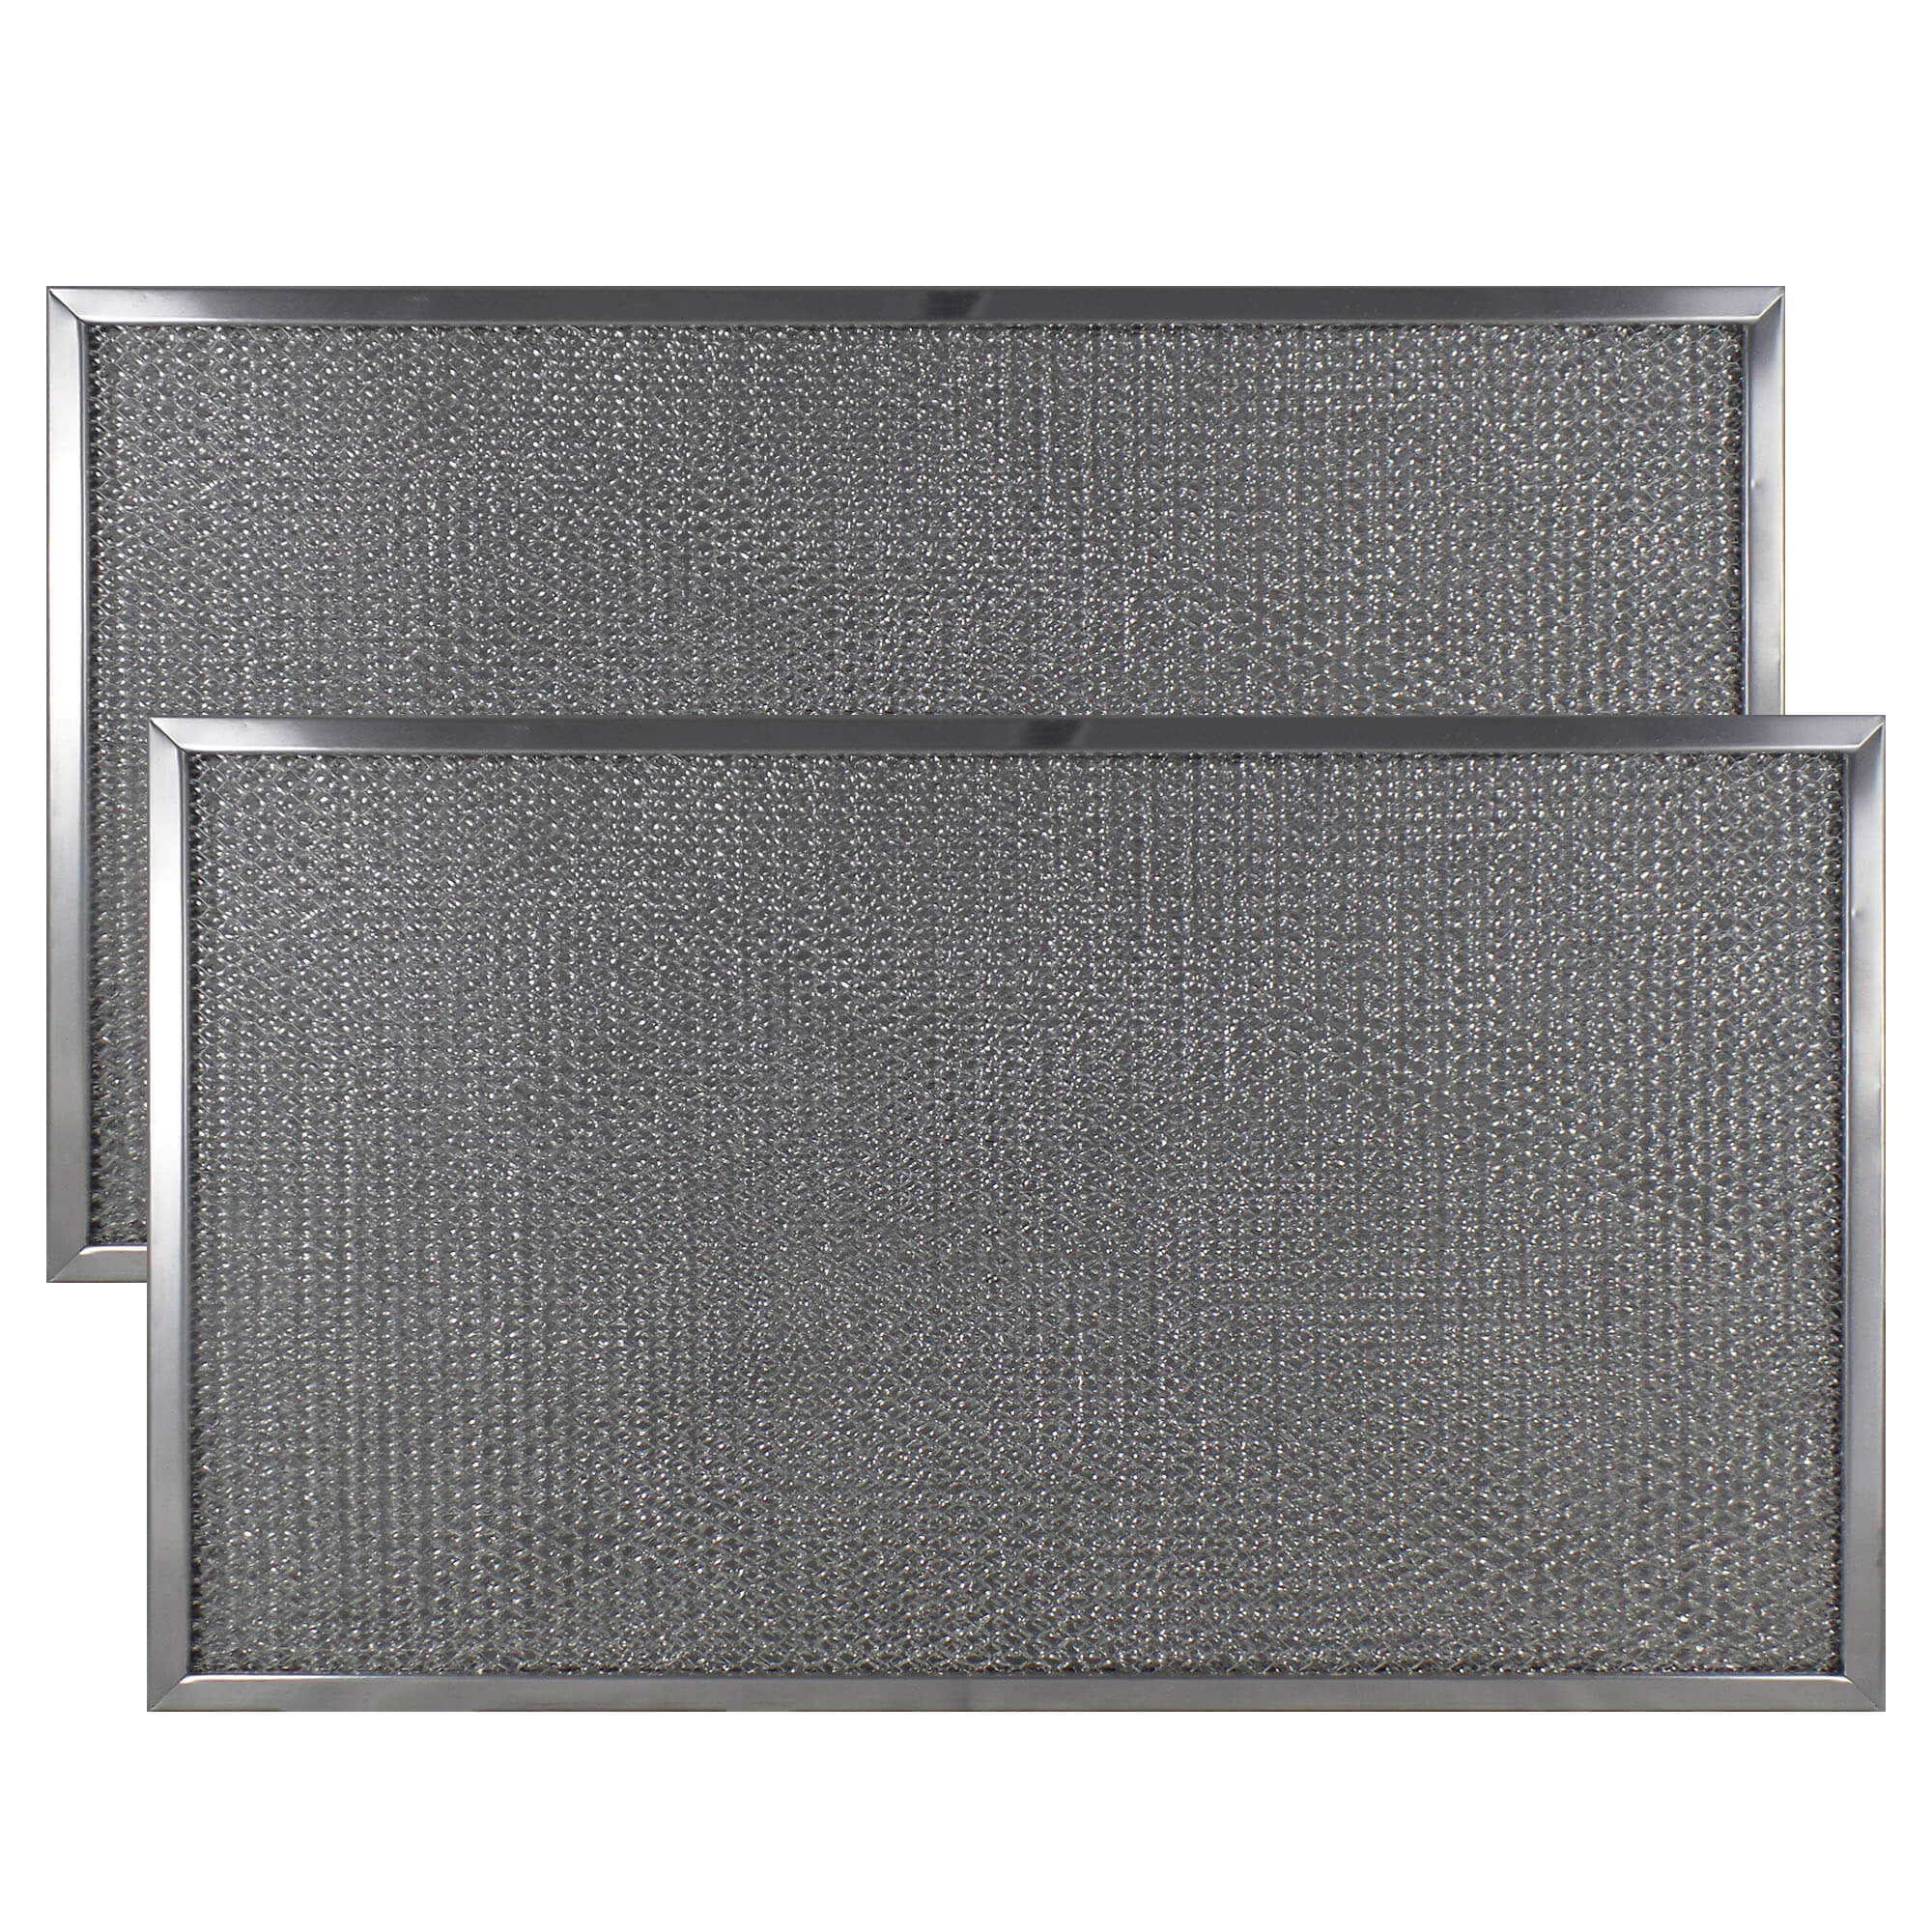 (2 Pack) Aluminum A60533-25 Grease Range Hood Filters 12 x 20 x